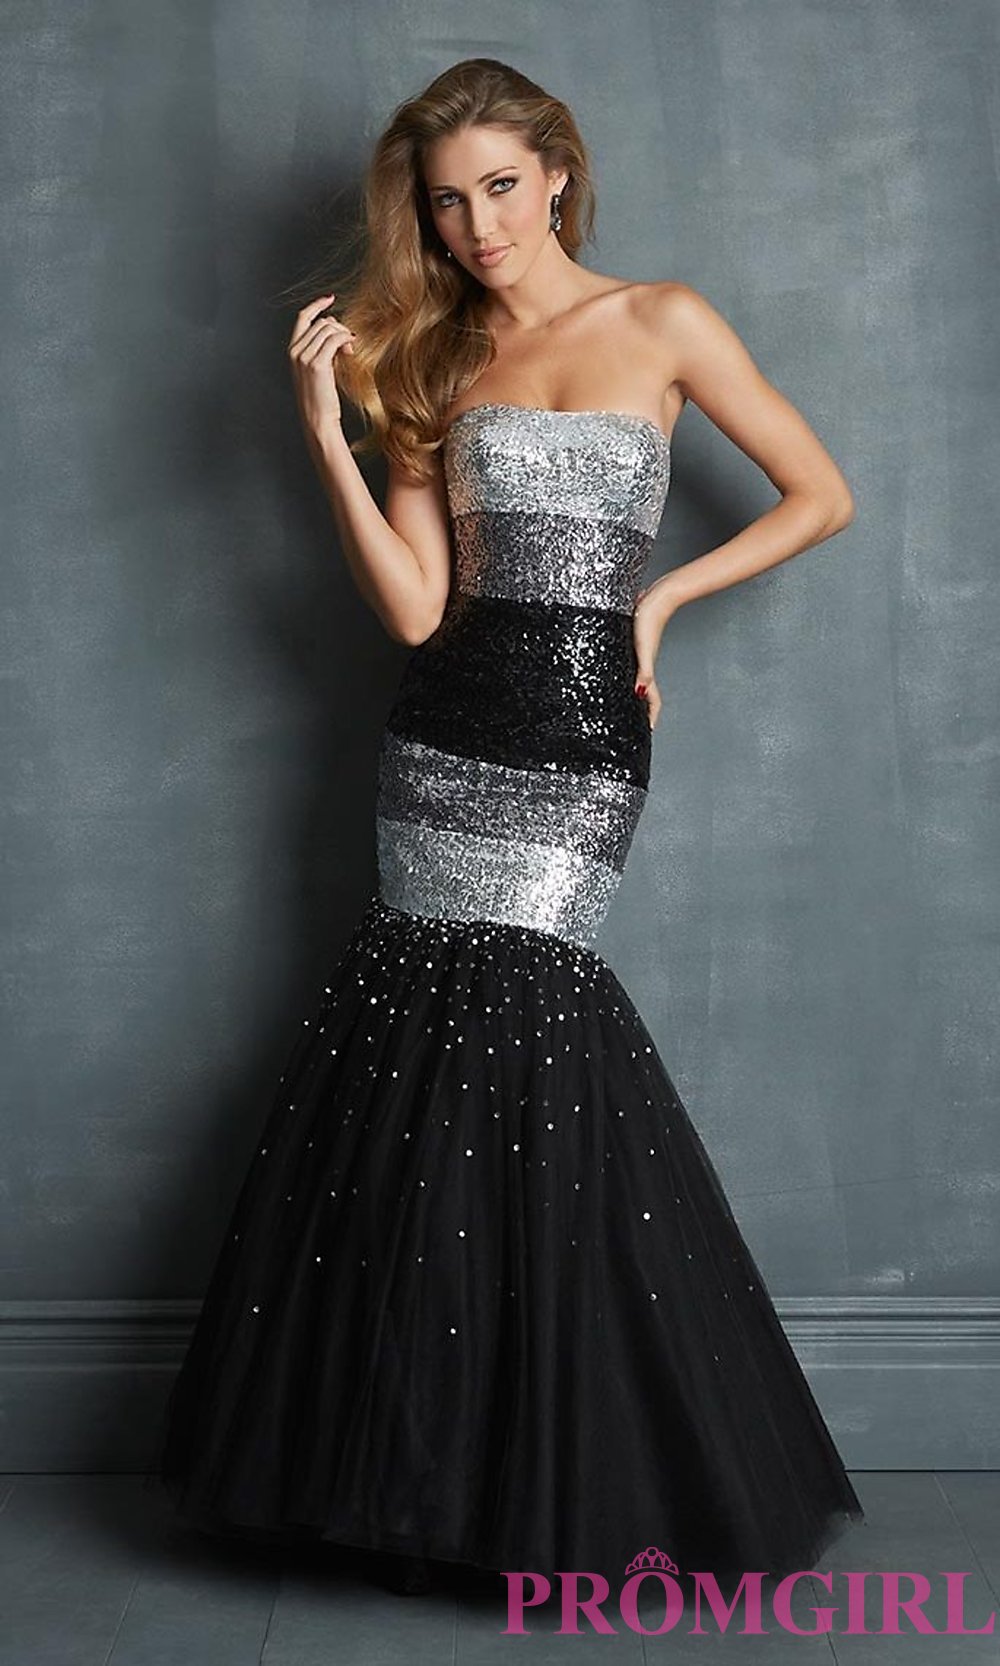 Black And Silver Glitter Dress : Style 2017-2018